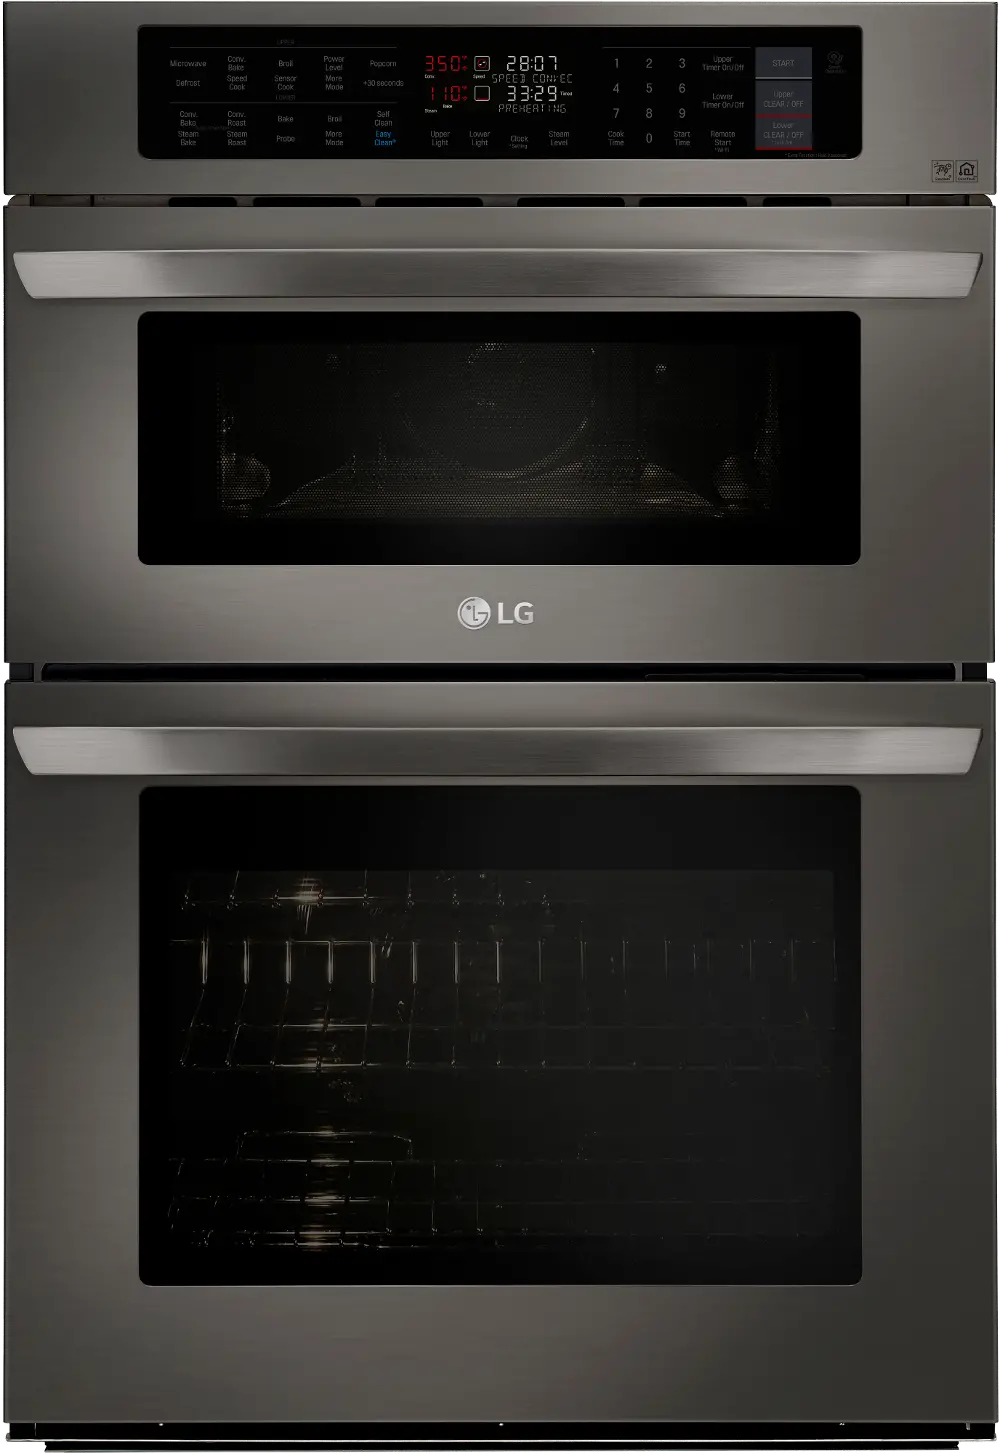 LWC3063BD LG 6.4 cu ft Combination Wall Oven - Black Stainless Steel 30 Inch-1